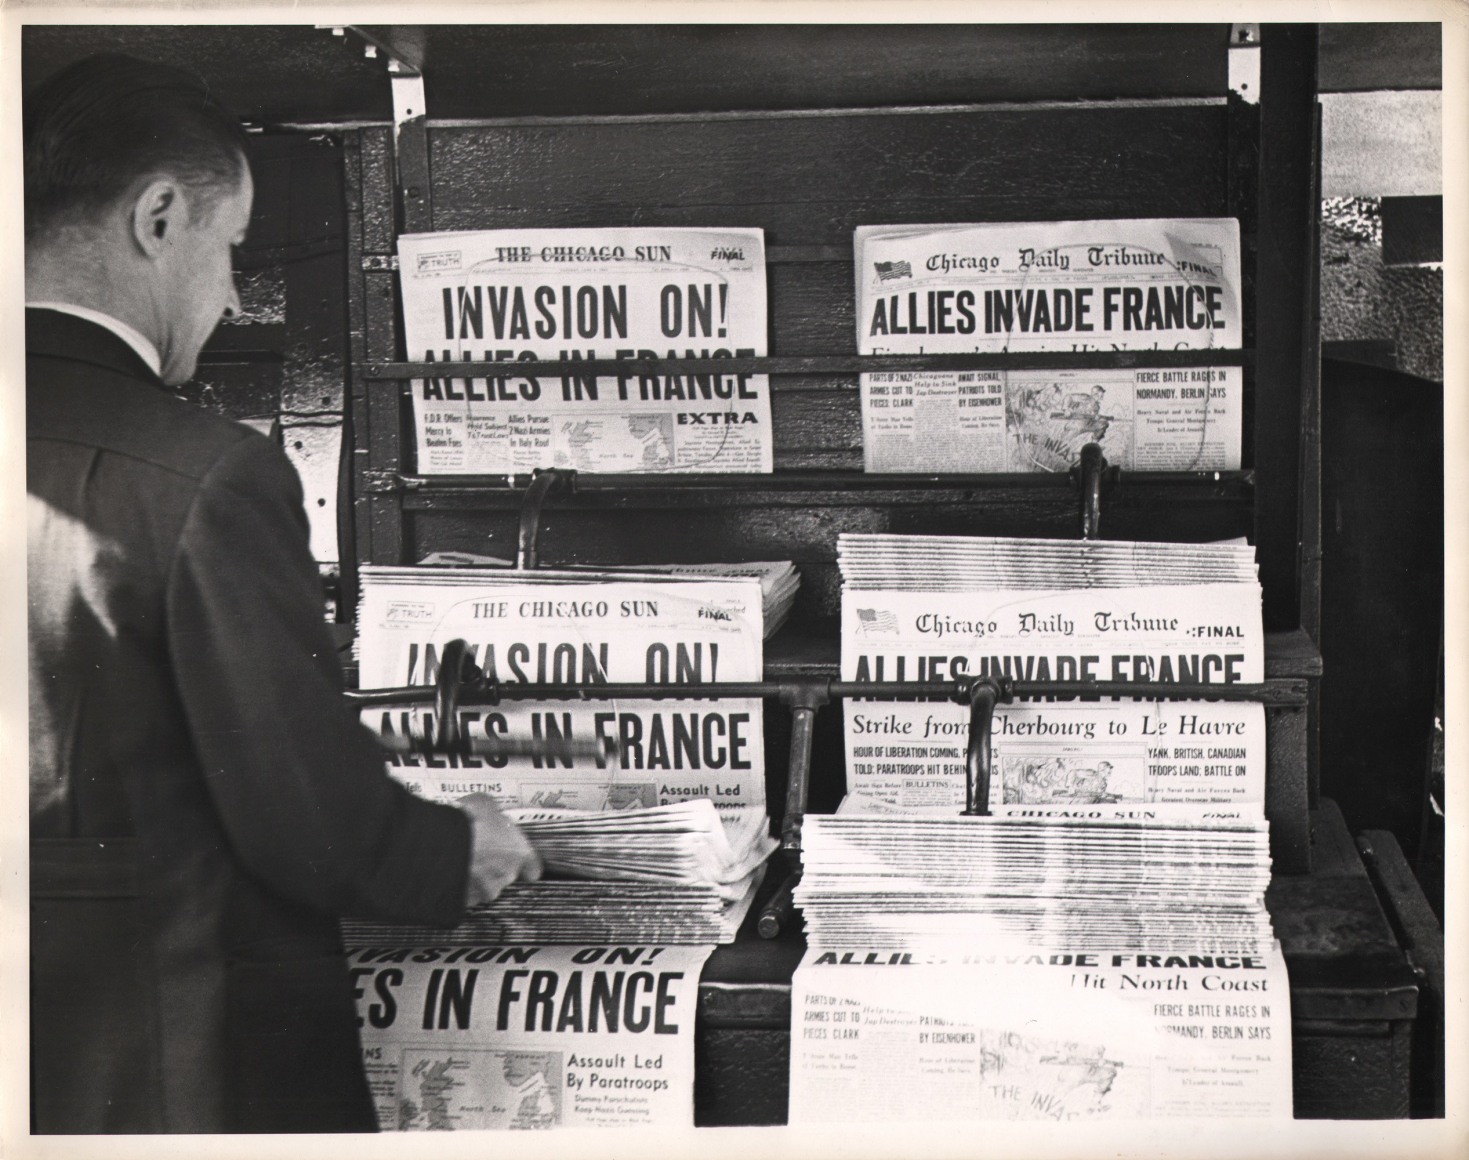 20. Gordon Coster, Untitled, ​1944. Newspaper display with headlines such as &quot;Allies Invade France&quot; and &quot;Invasion On! Allies in France&quot;